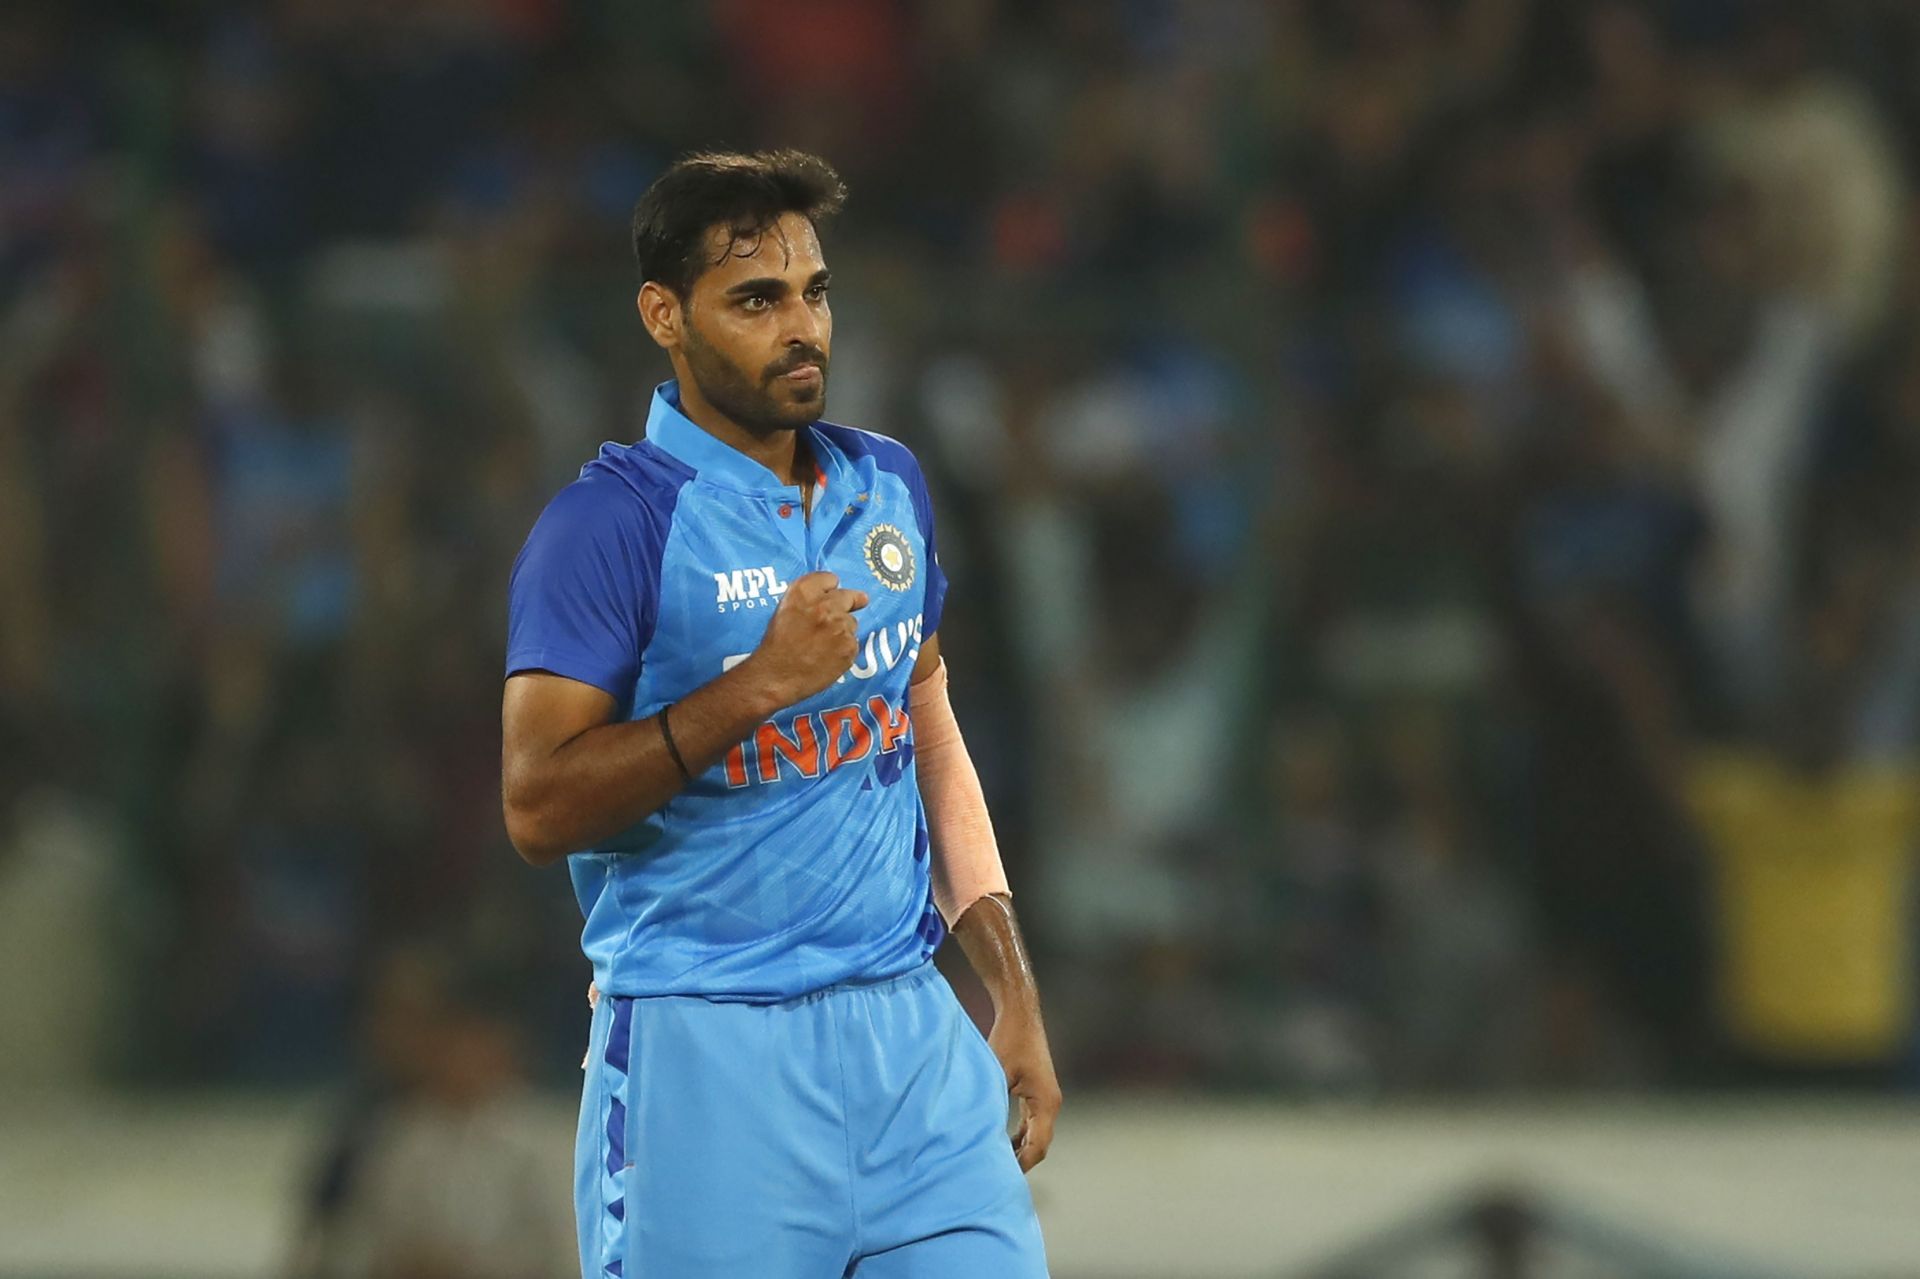 Bhuvneshwar Kumar picked up two wickets against the Netherlands.